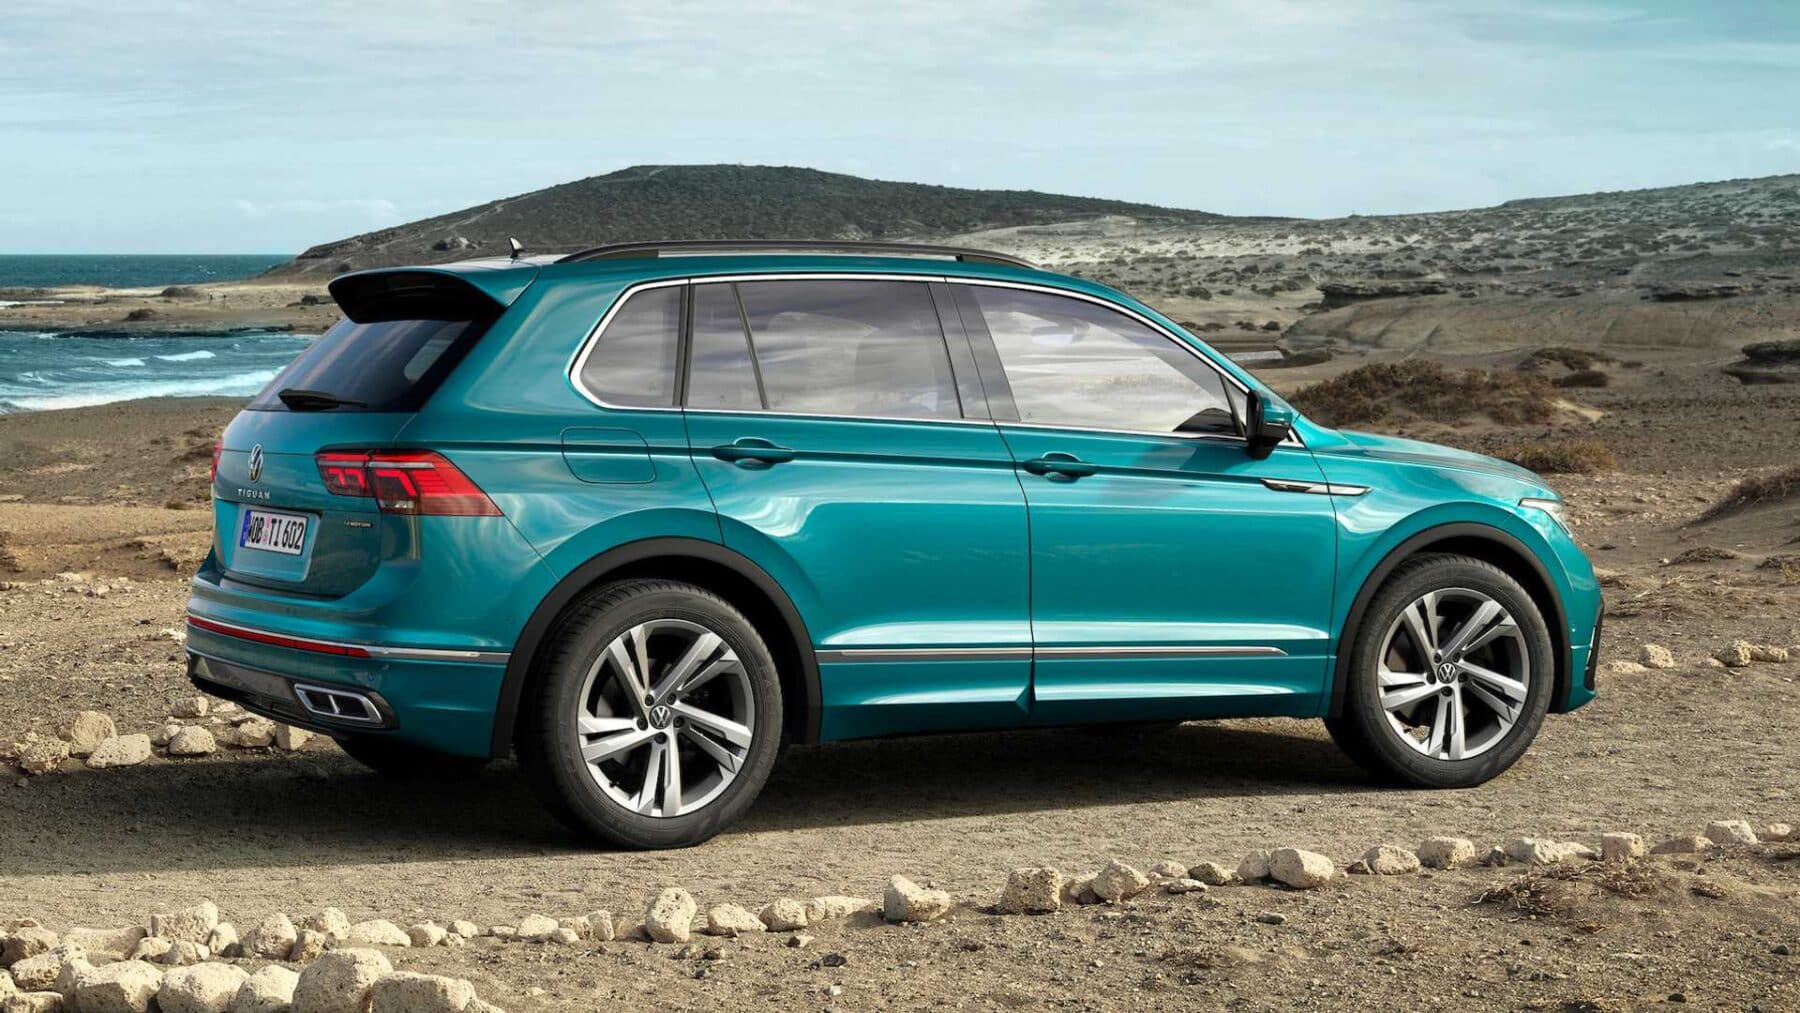 All the prices of the renewed Volkswagen Tiguan for Spain